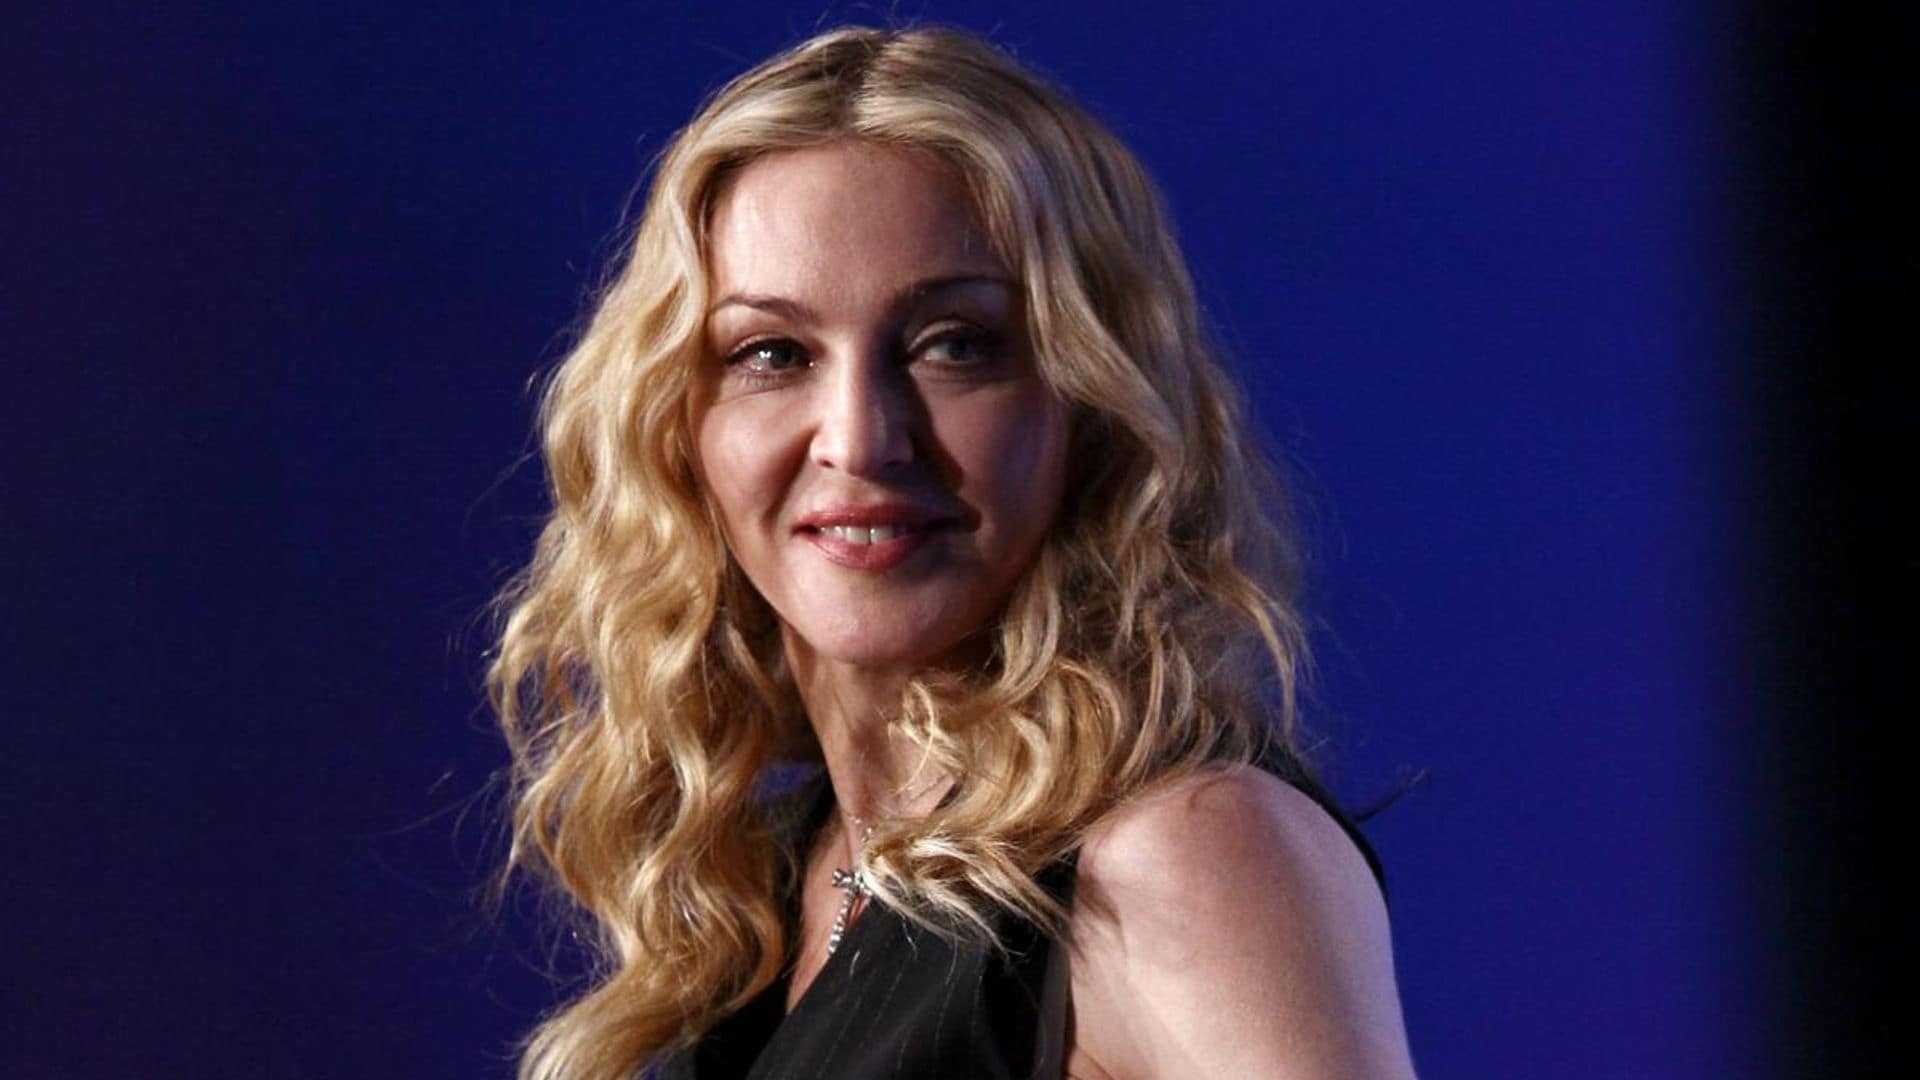 Madonna is ‘back home and feeling better’ after scary hospitalization